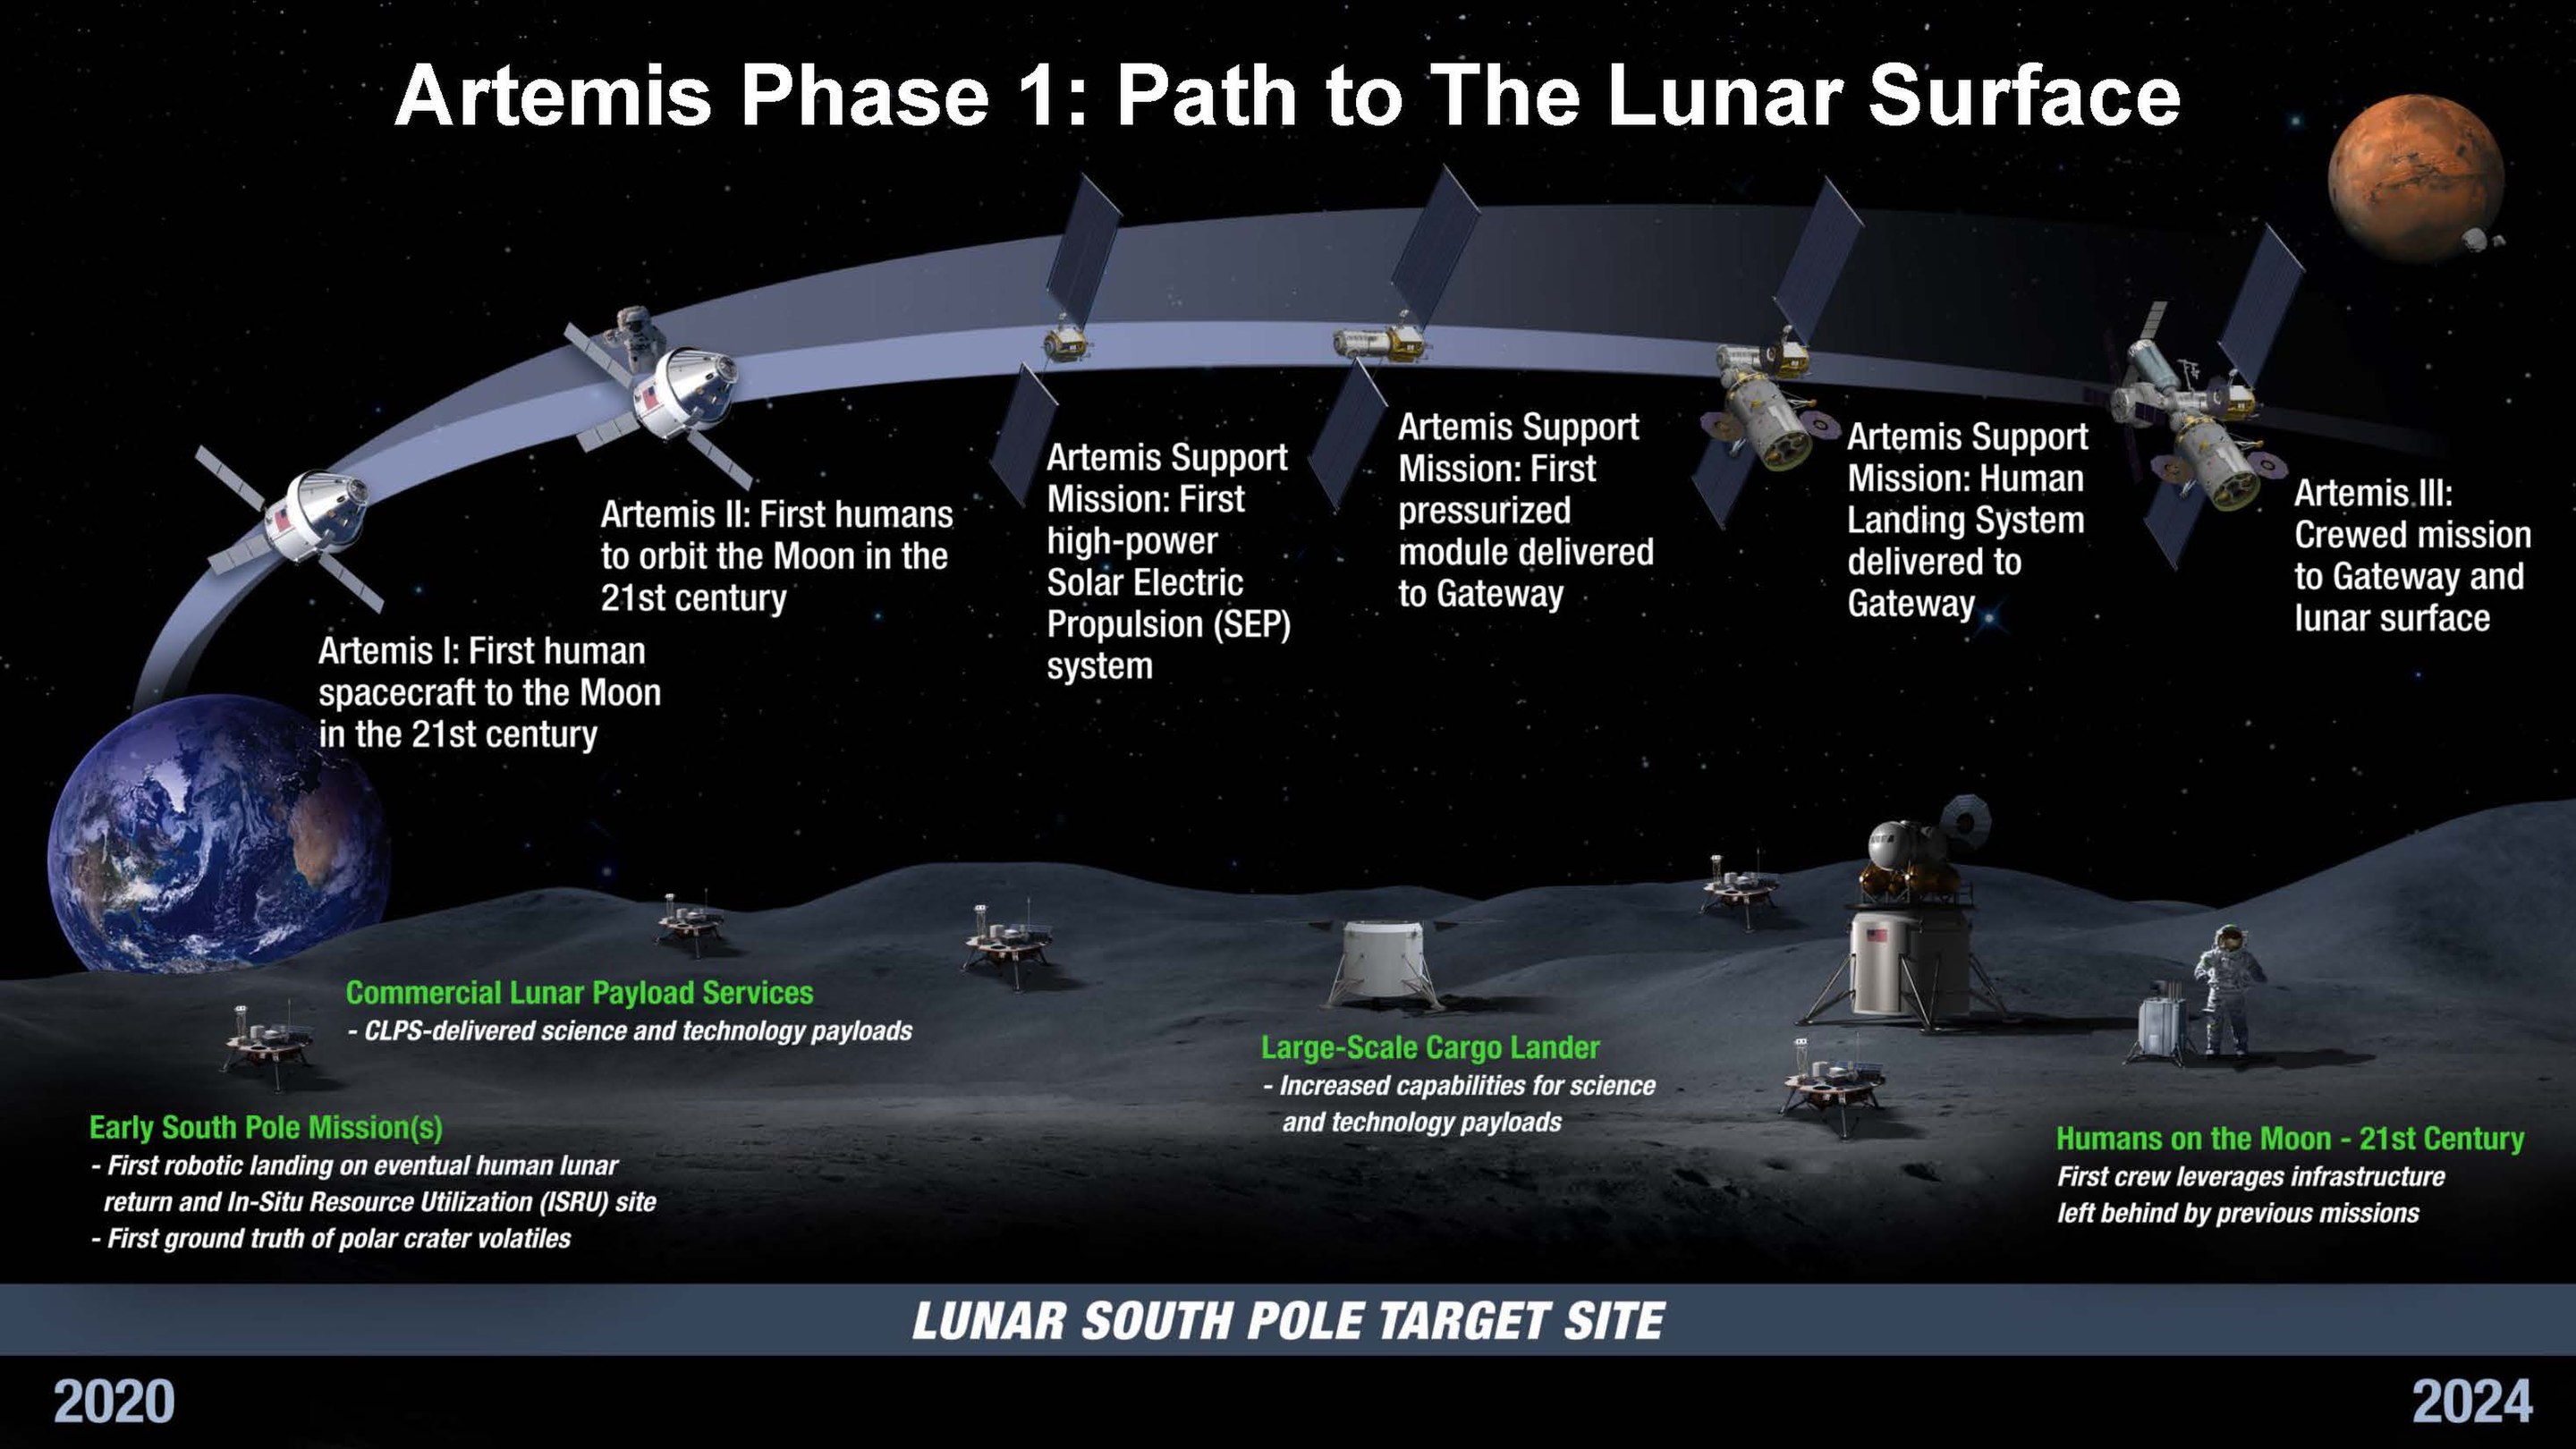 a diagram of how the Artemis missions will approach the moon" data-uuid="bdbbbb2b-7b0b-366b-8265-ece3a688bc58